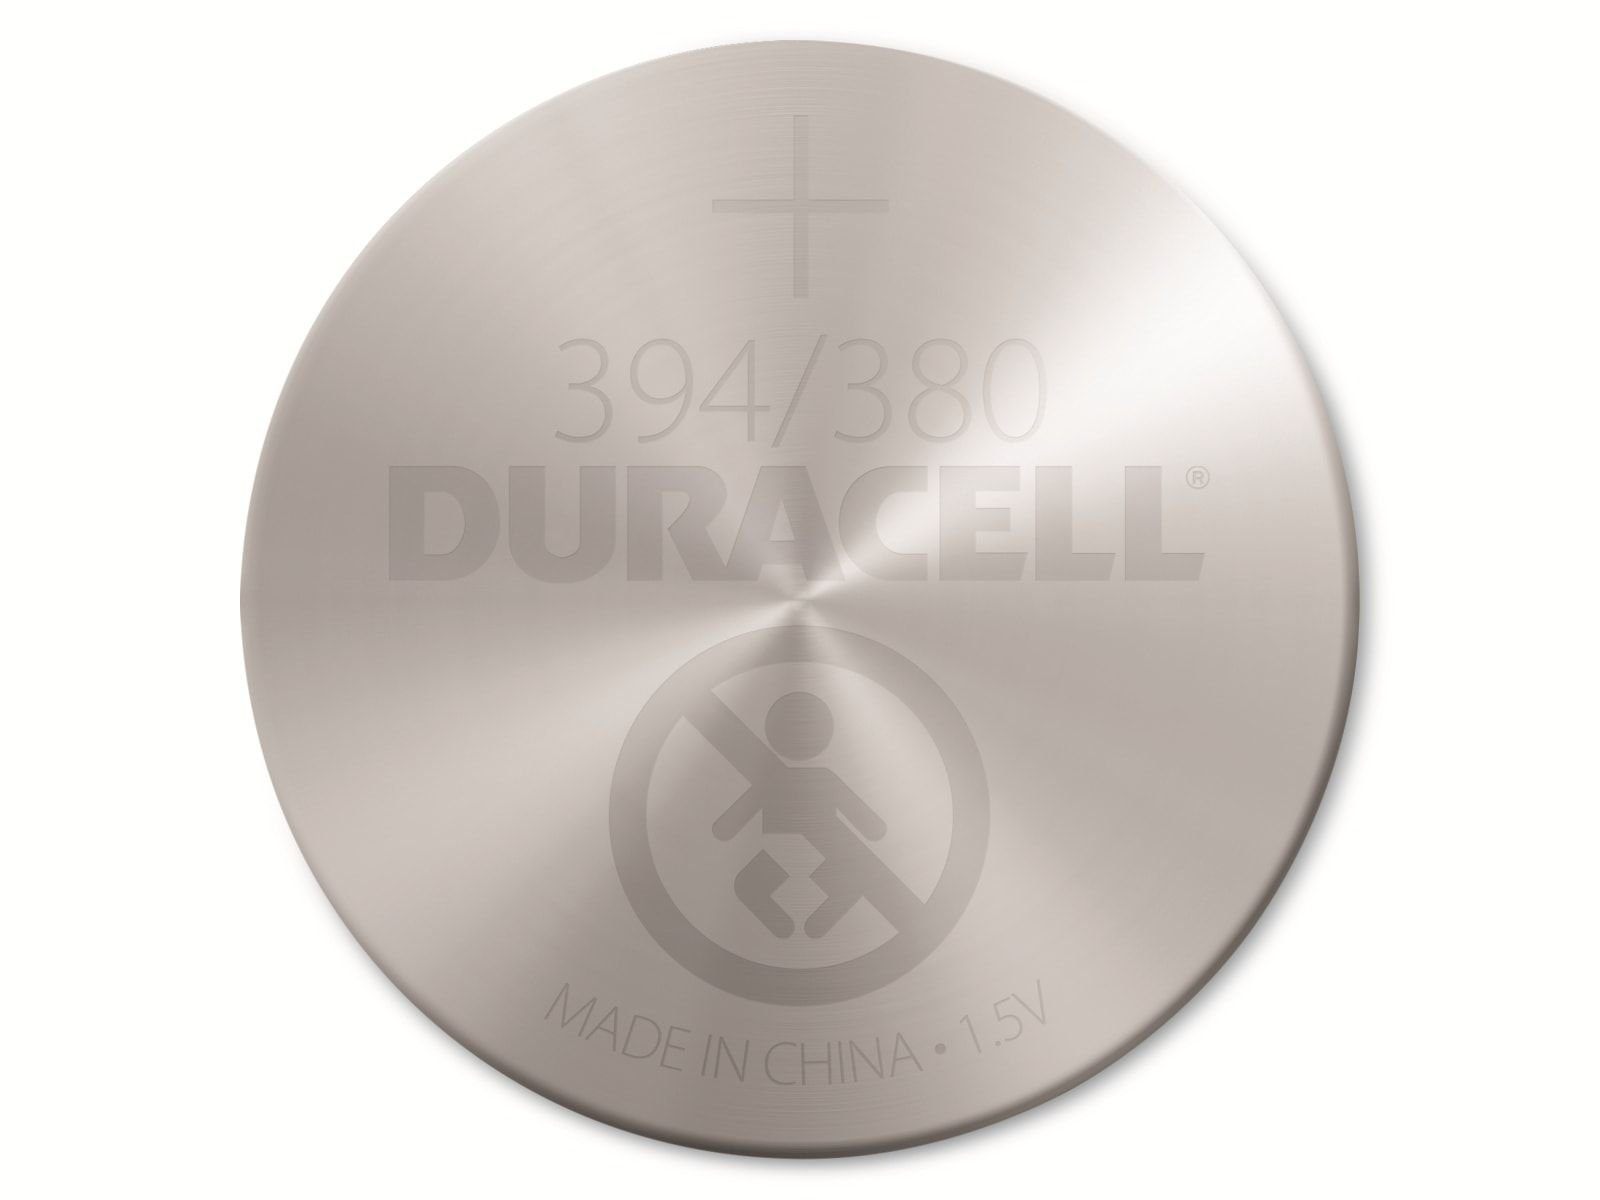 Knopfzelle Duracell SR45, Oxide-Knopfzelle DURACELL Watch 1.5V, Silver